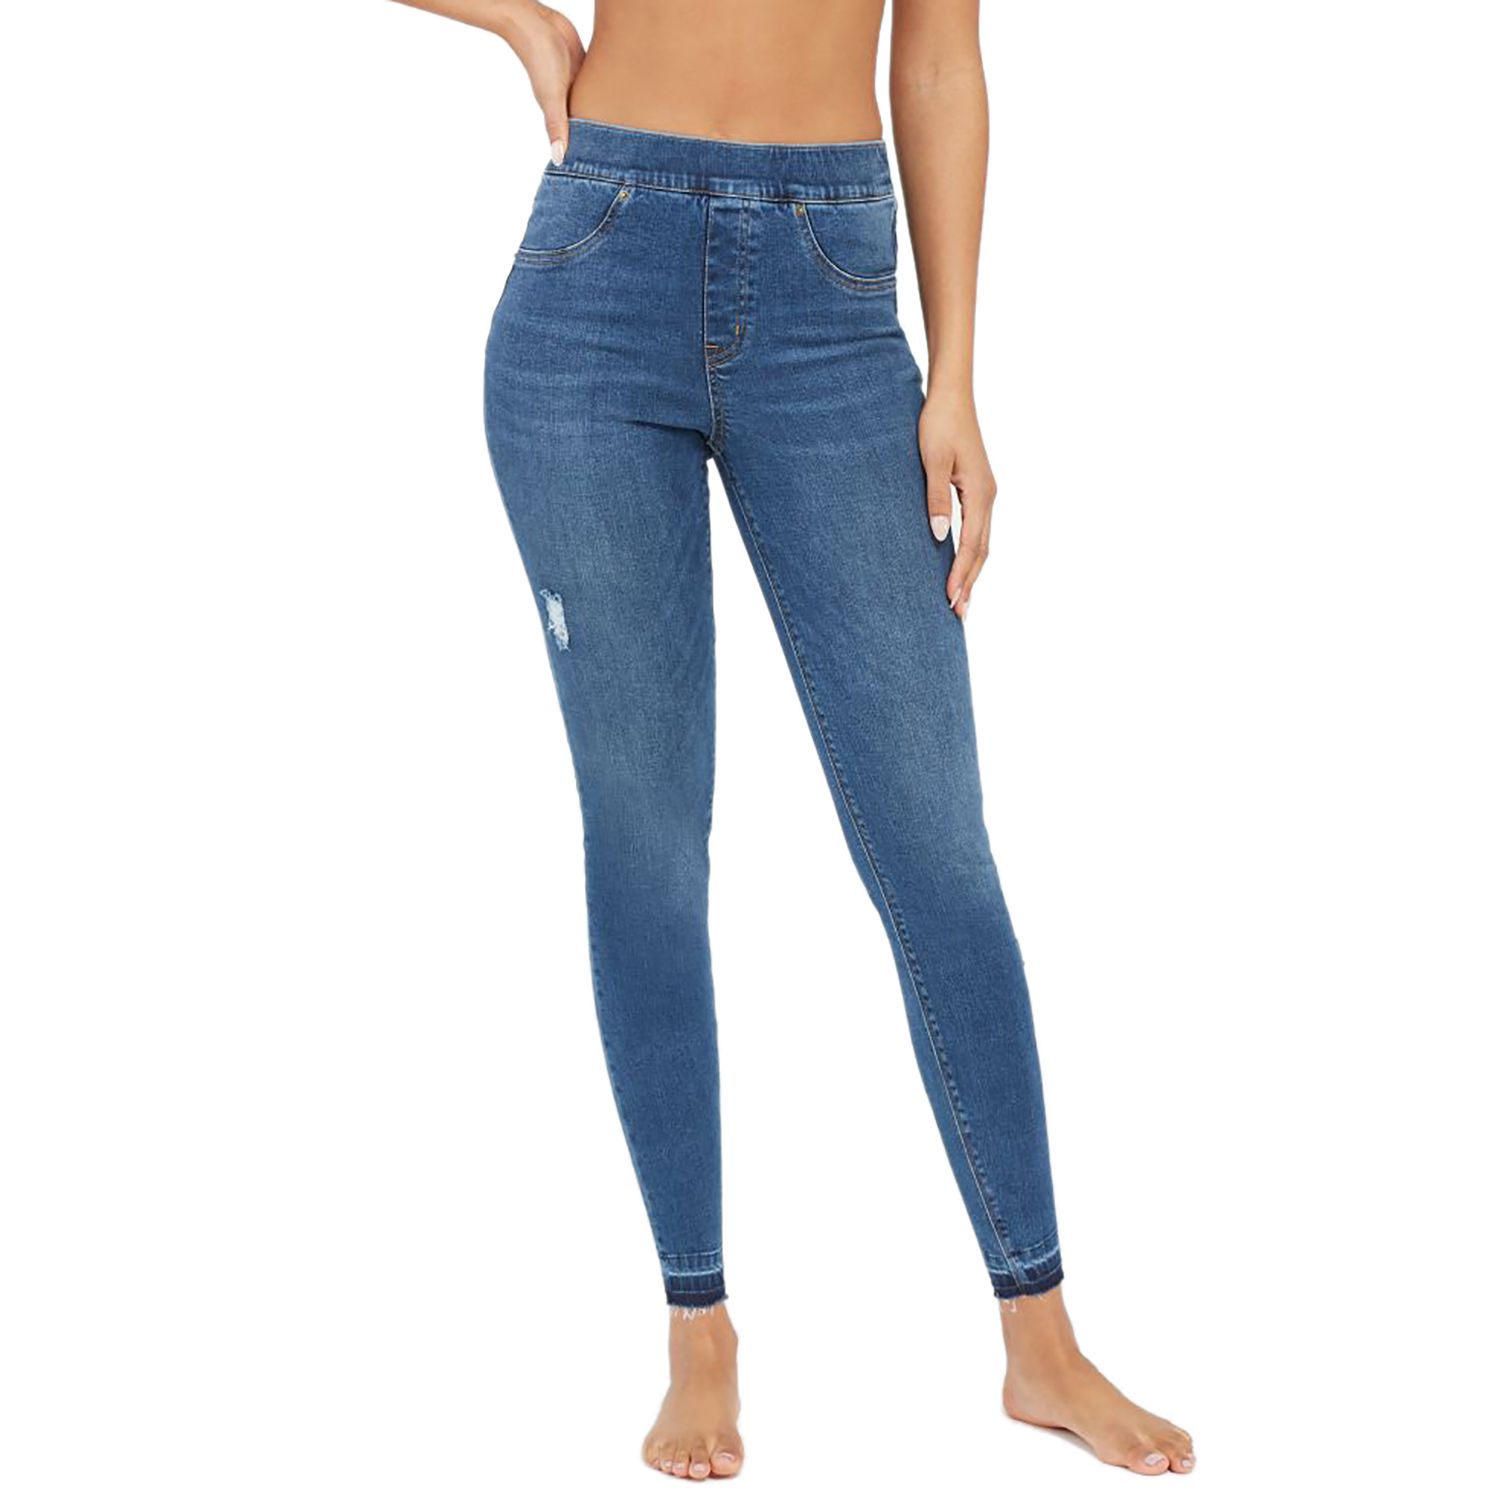 Spanx Distressed Ankle Skinny Jeans Are 50% Off Today Only | PEOPLE.com